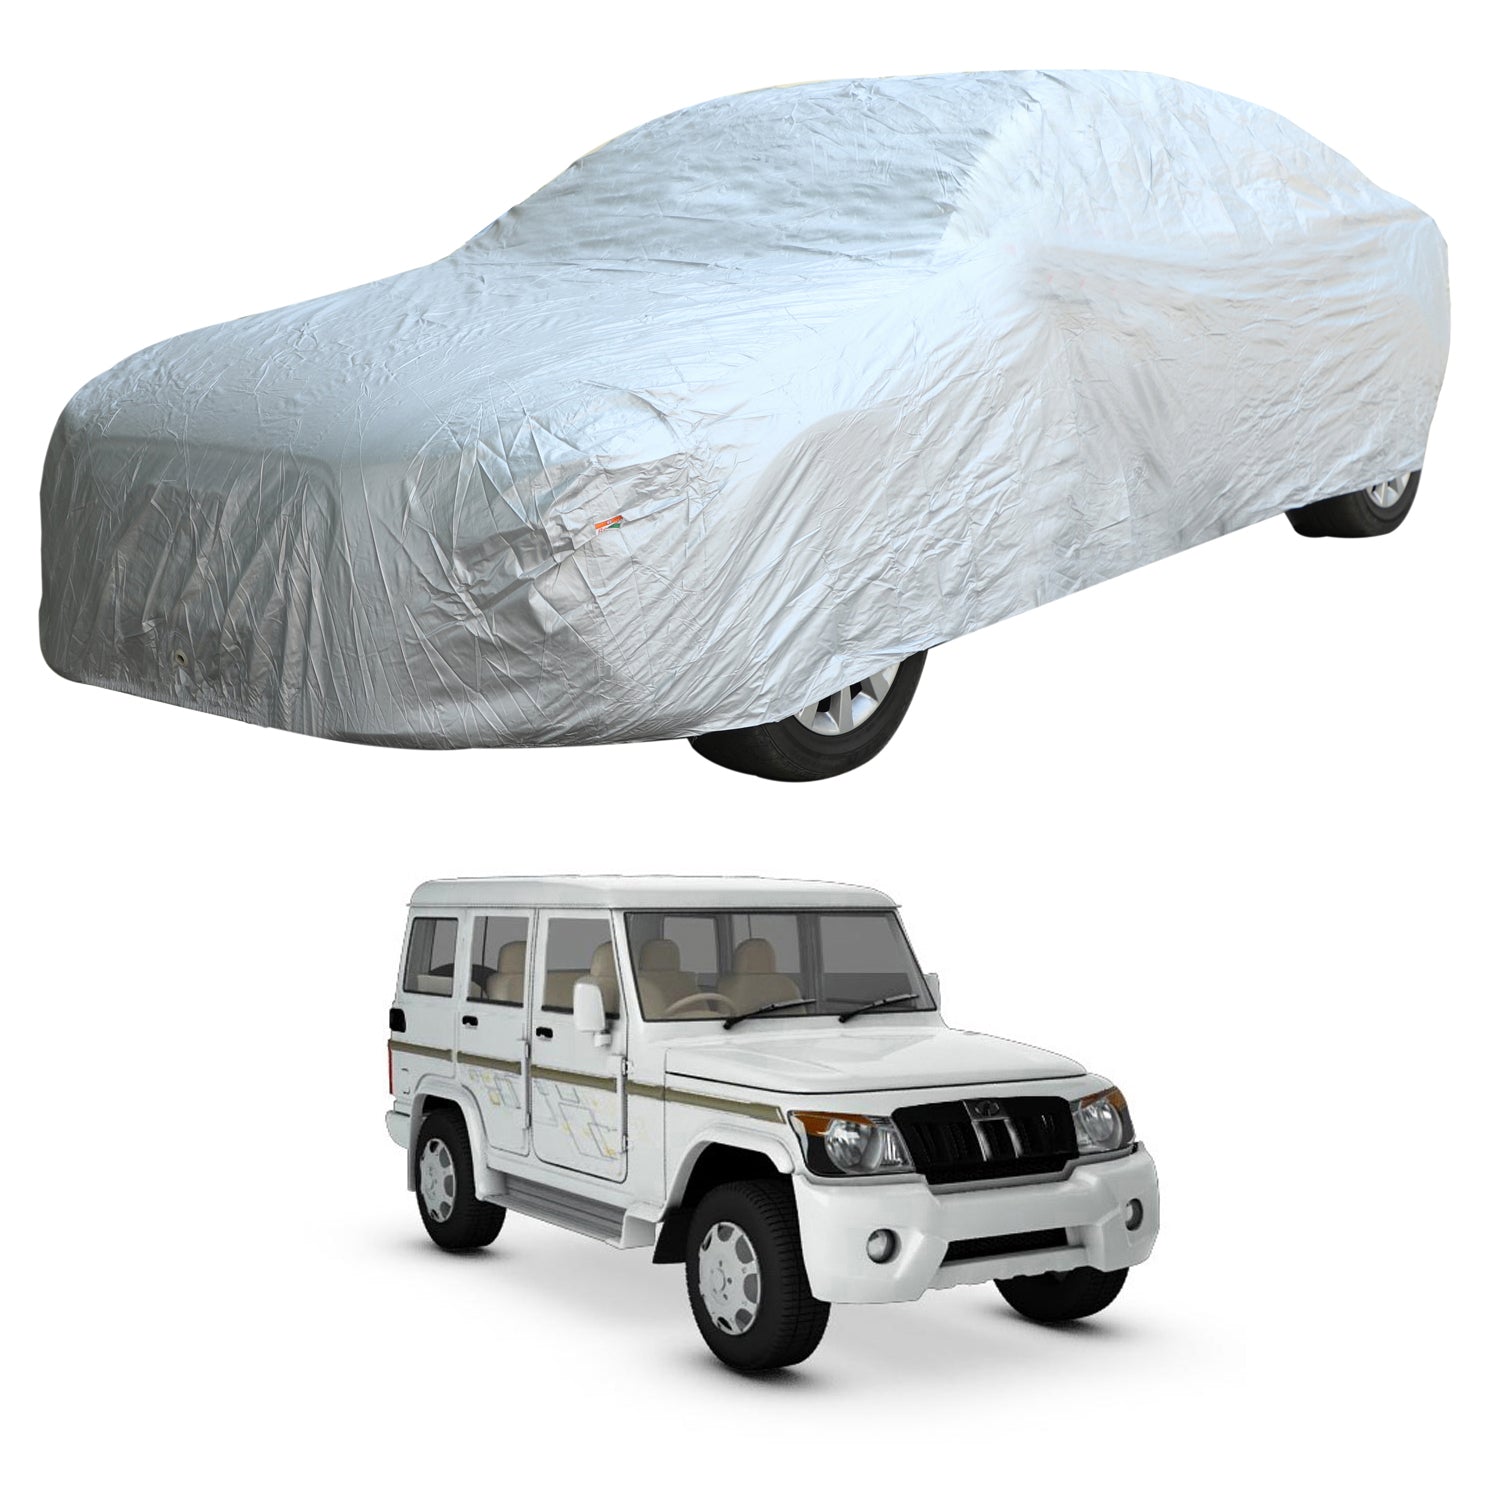 Protect Your Car with High-Quality Car Body Covers - Oshotto